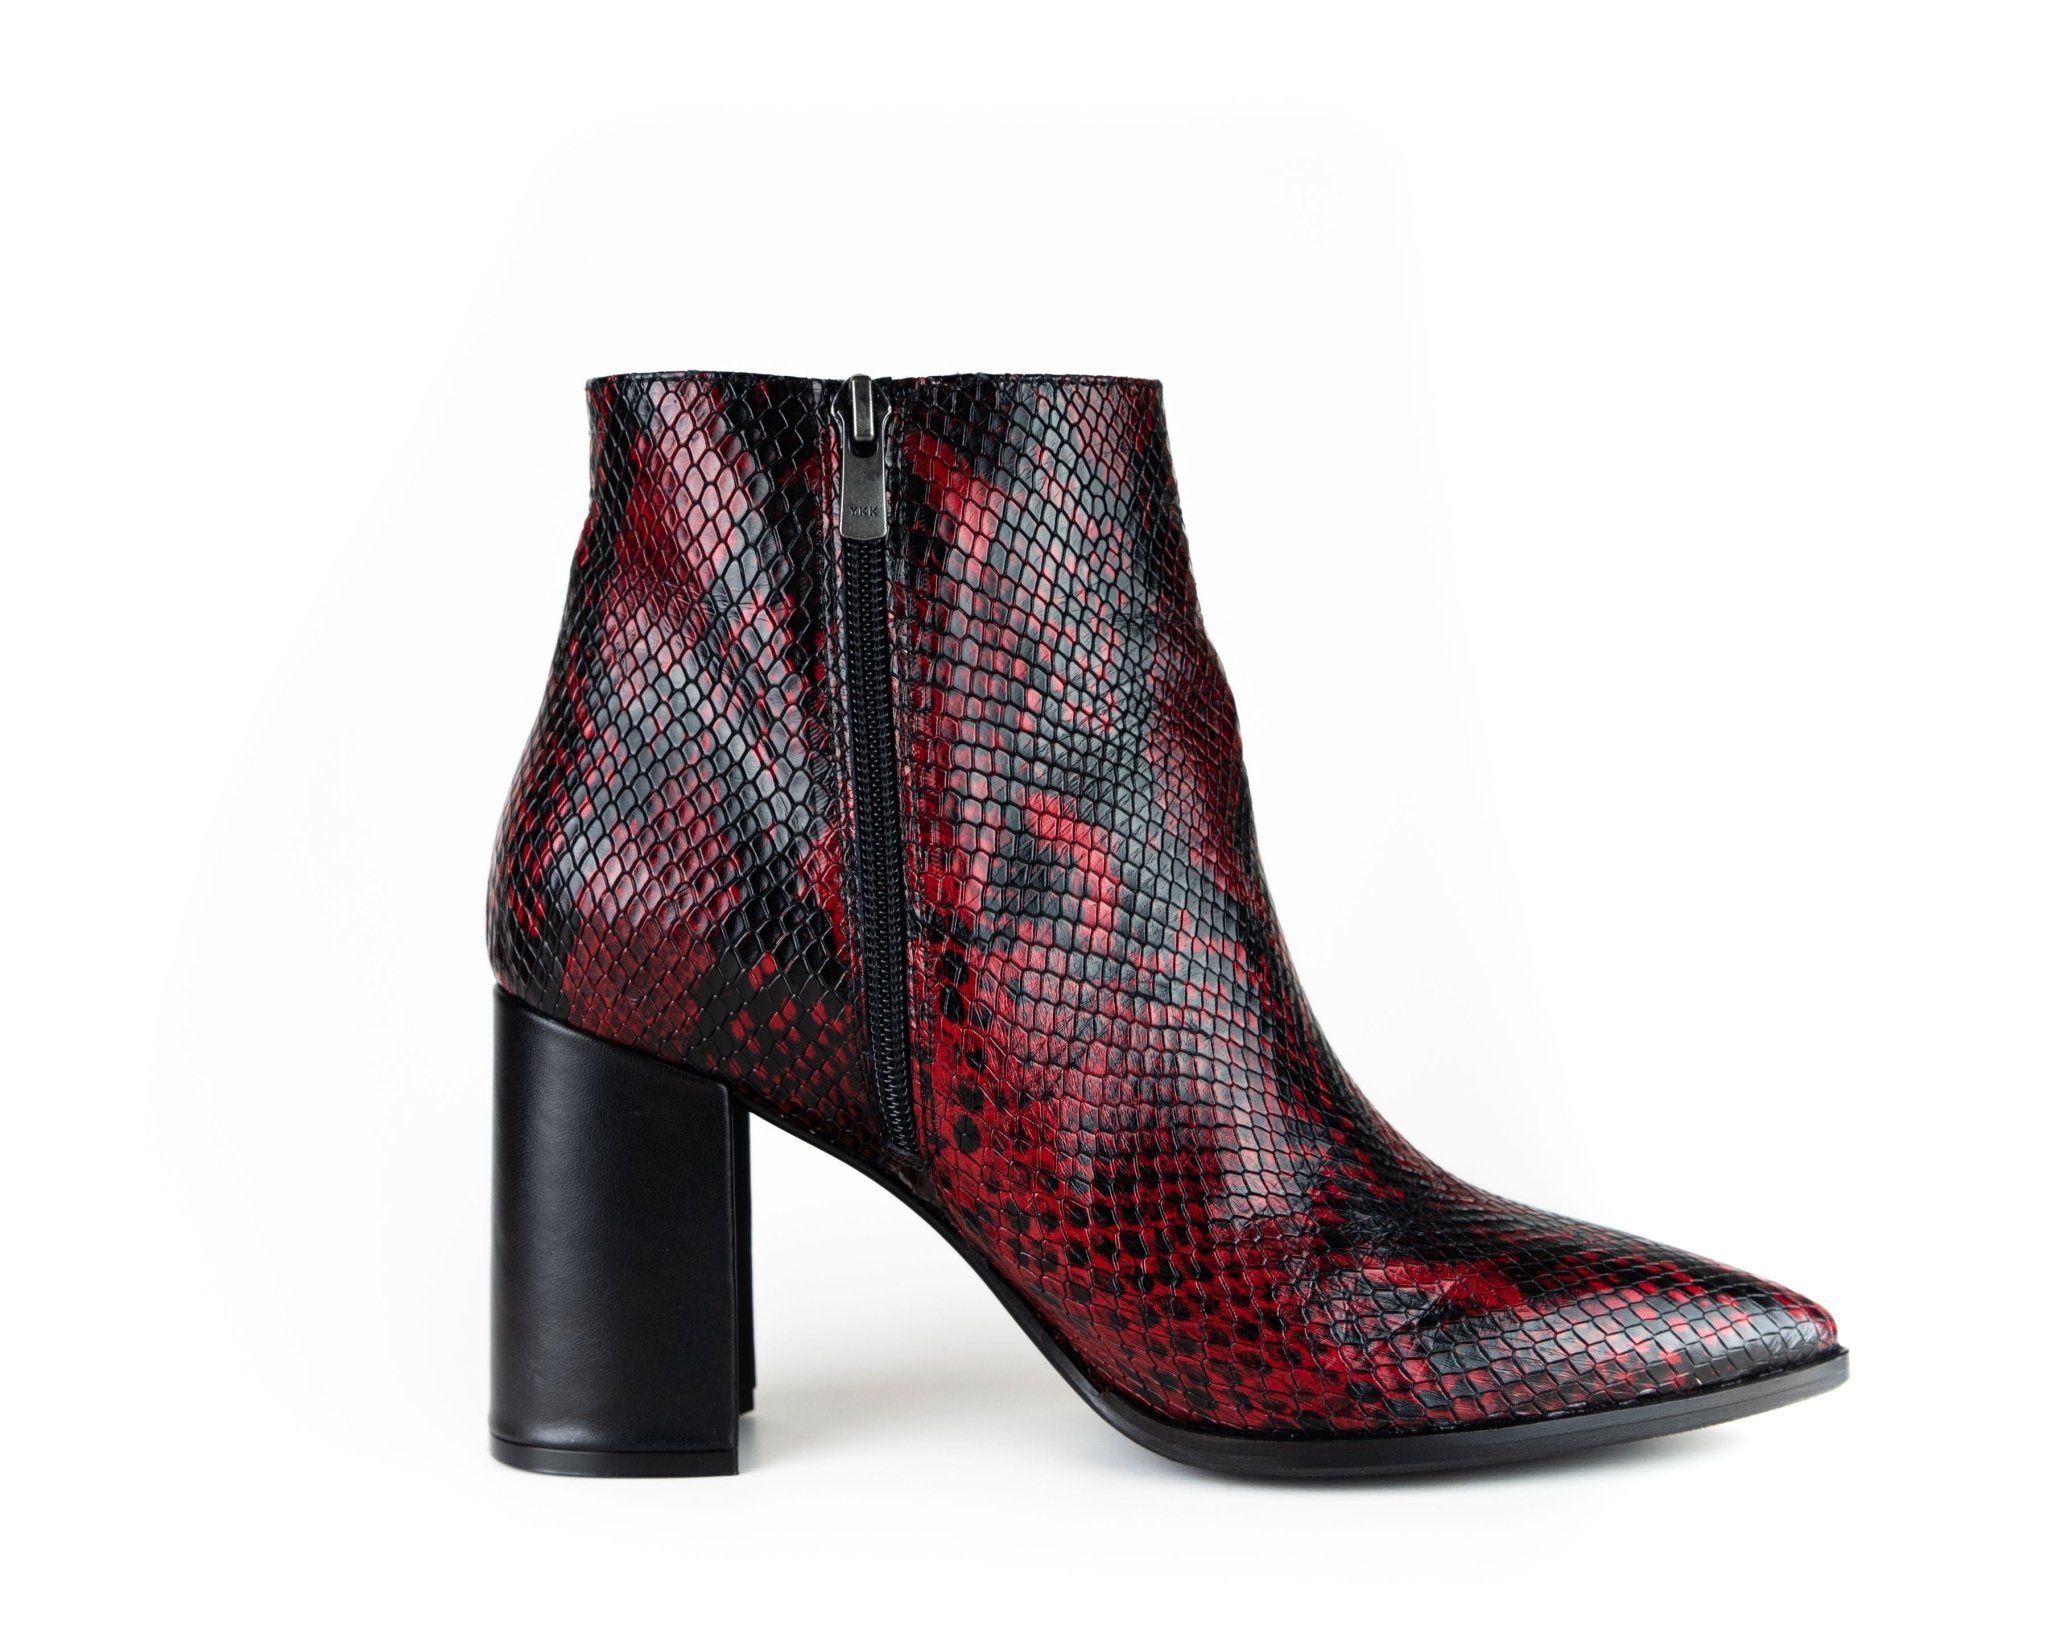 Viper Red Ankle Boot Boots by Sole Shoes NZ AB6-35